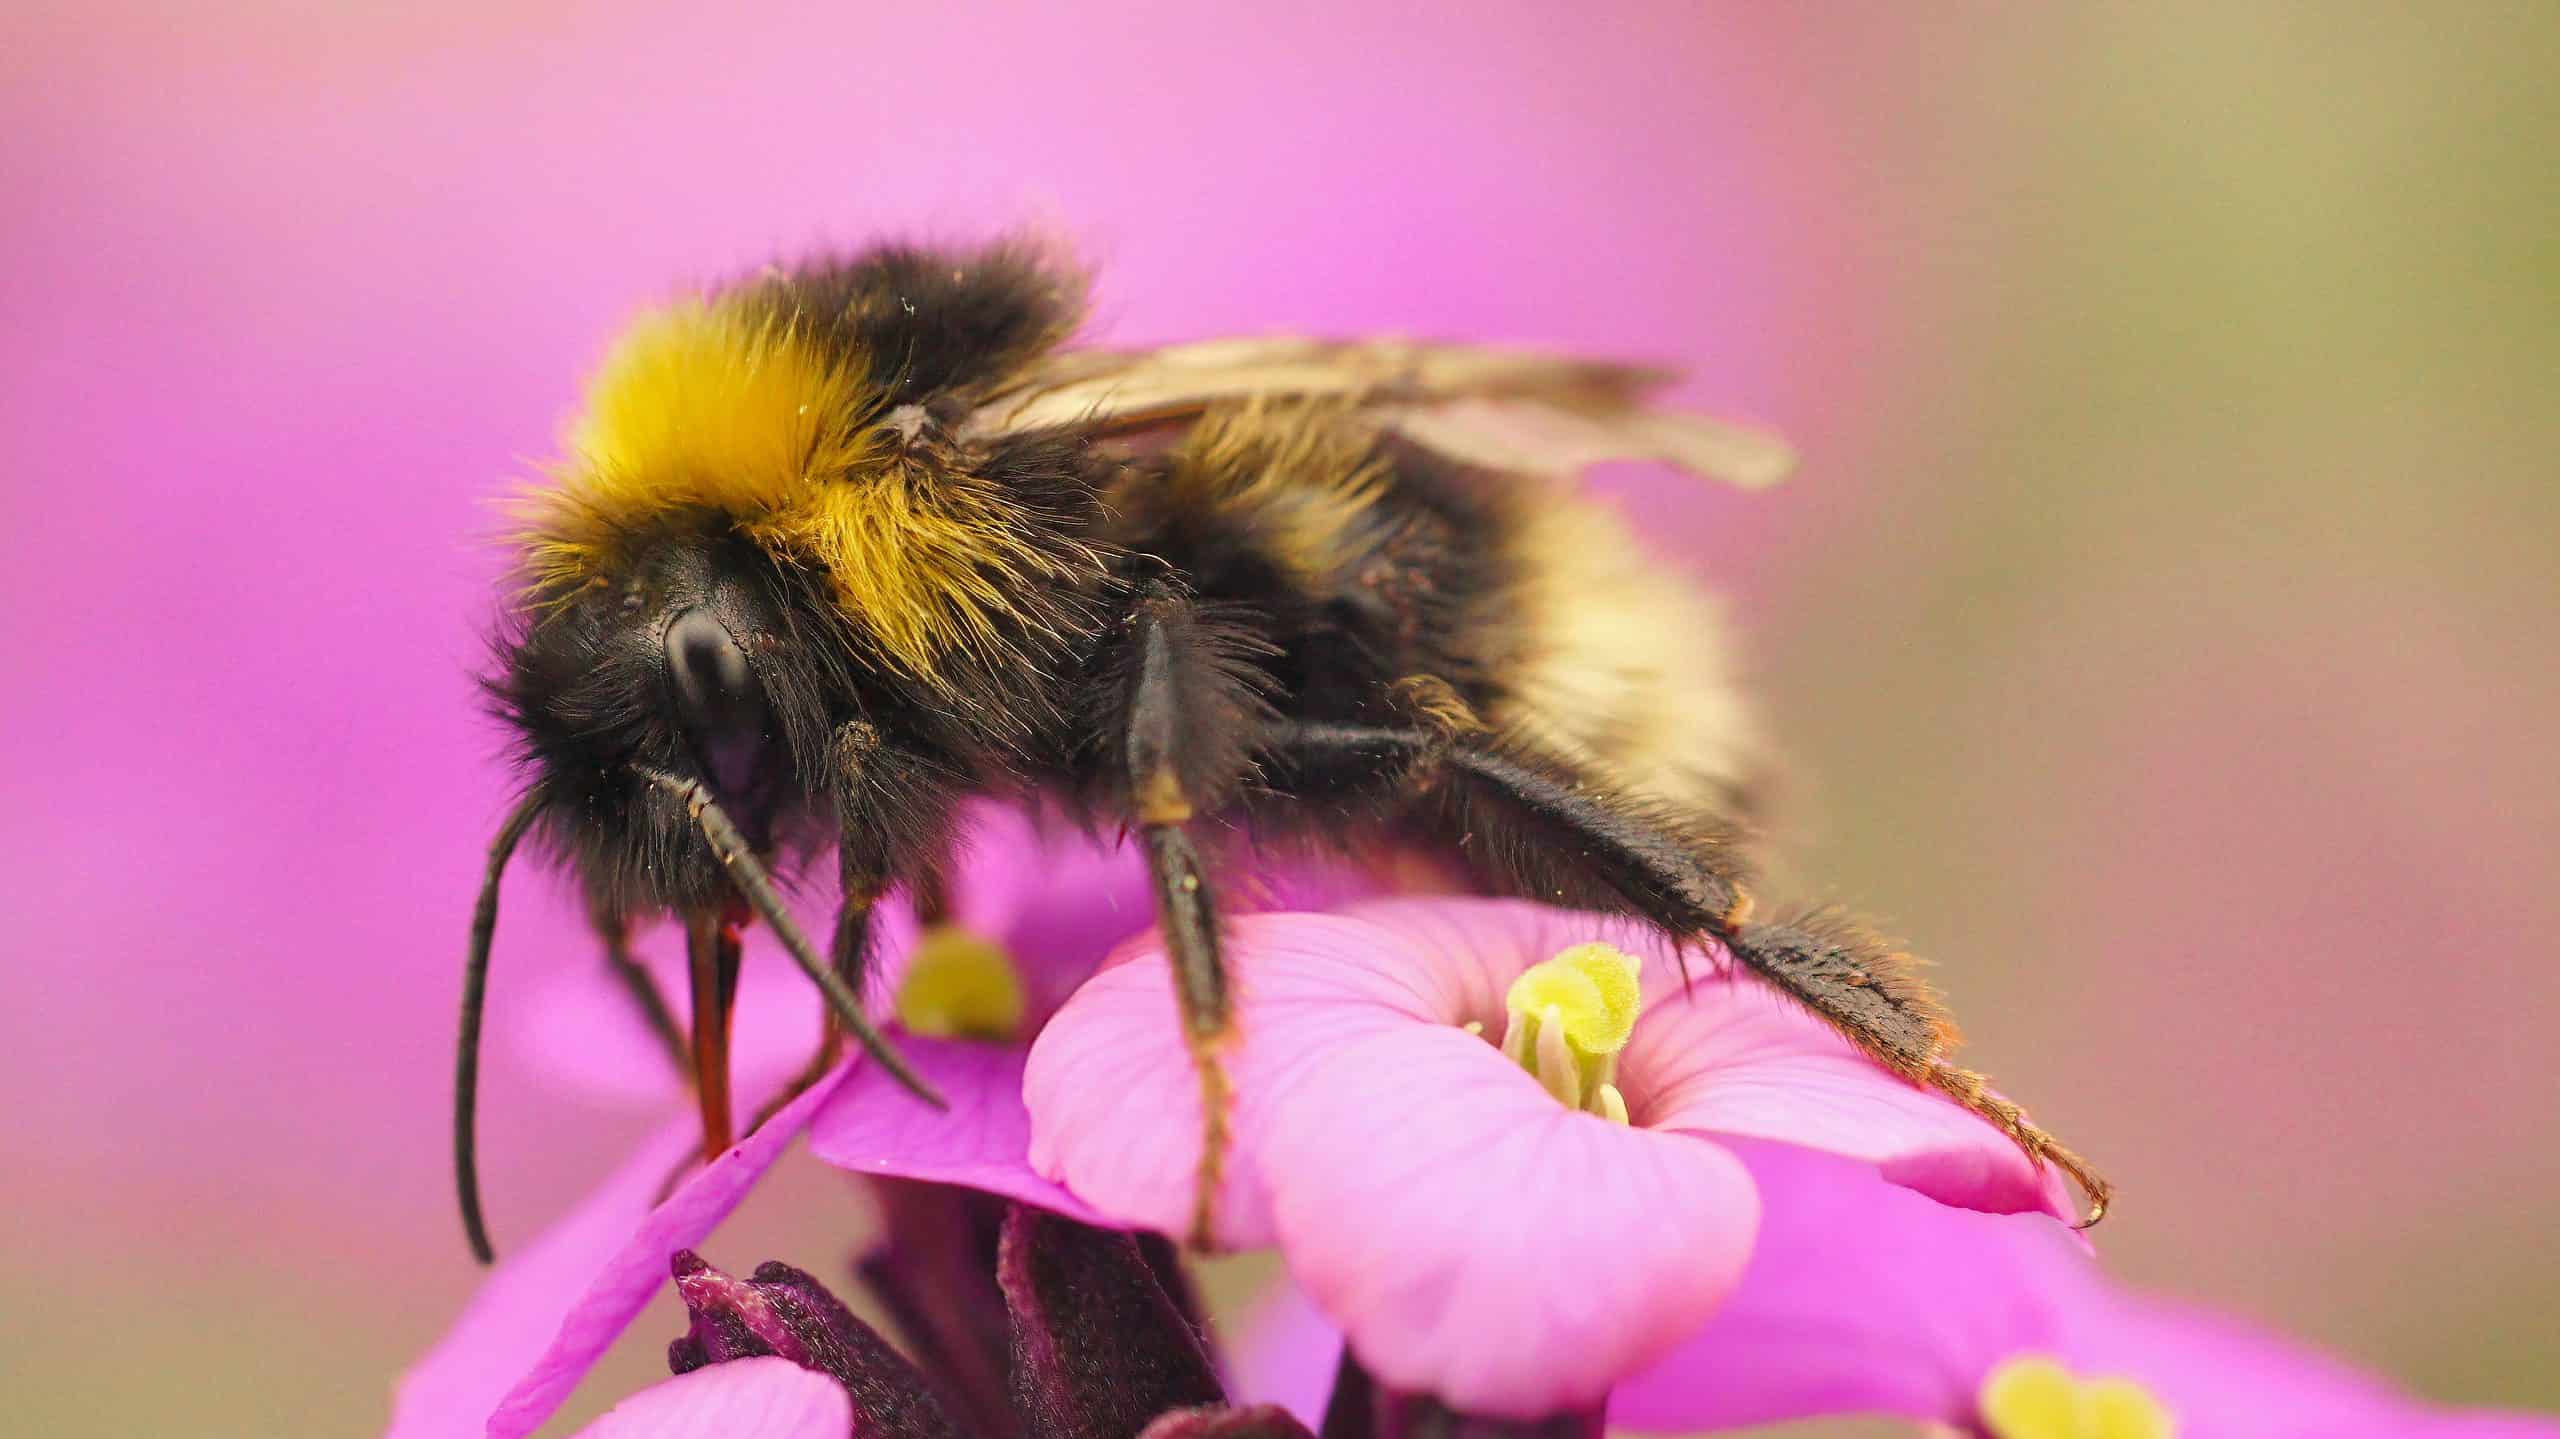 A very hairy bumblebee is perched on a pink flower with a yellow center the moon will be has a brownish black head a yellow collar a brown thorax and a yellow and brown striped admin with the last segment being a very light yellow to cream color. The bumblebee is center frame at a slight angle with its head in the left part of the frame toward the front and its tail in the right part of the frame toward the back